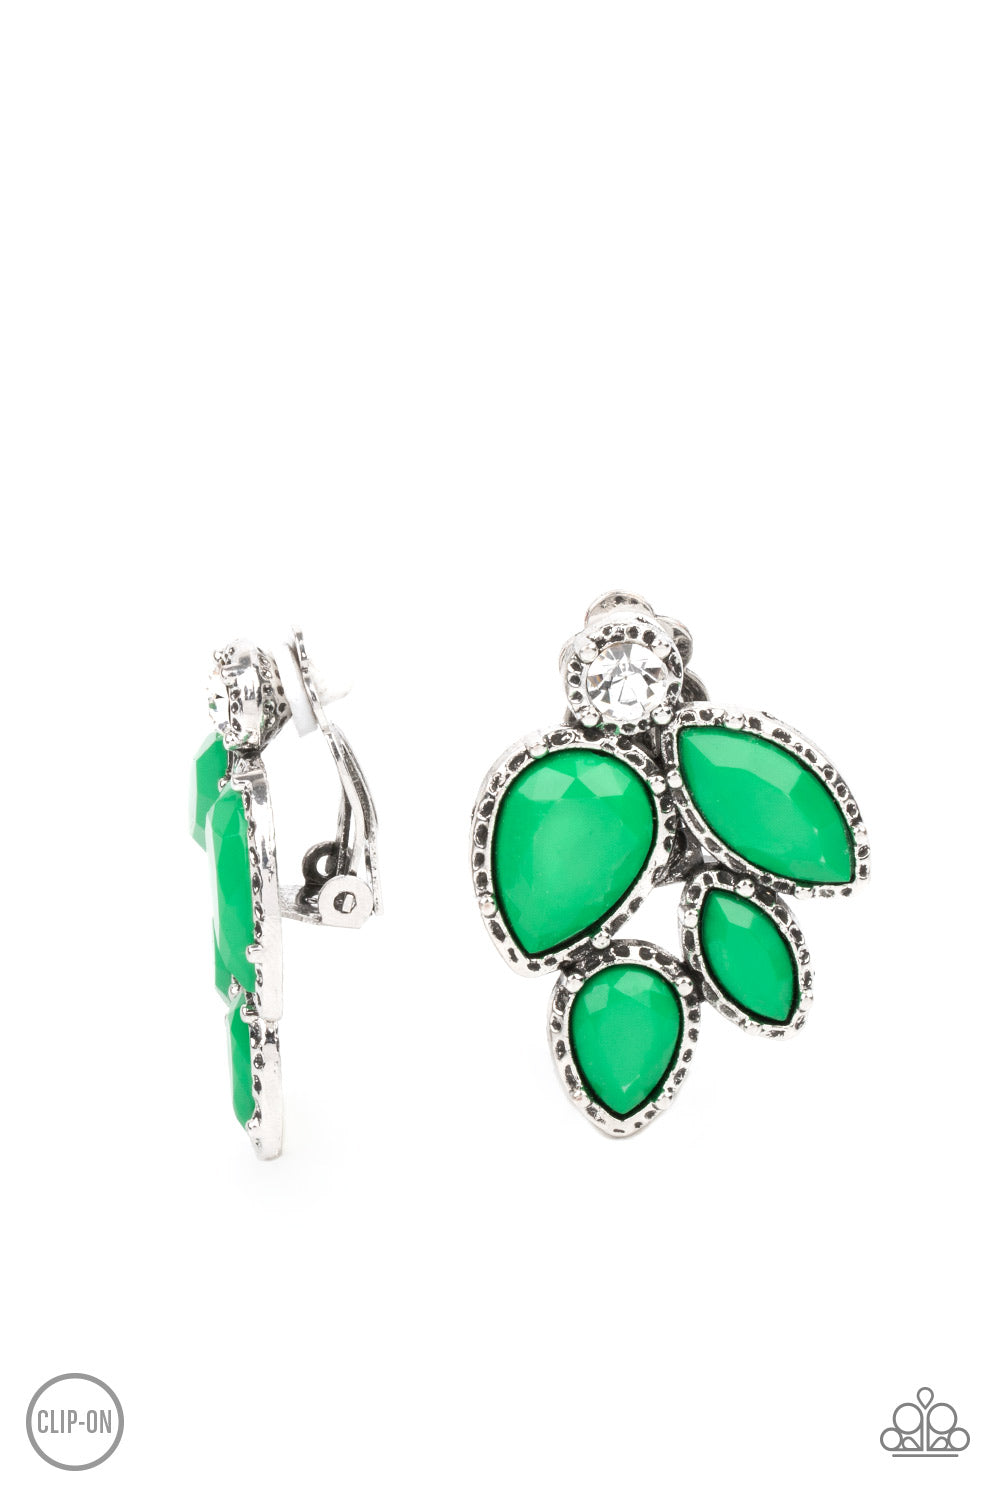 Fancy Foliage Green Clip-On Earring - Paparazzi Accessories  Featuring a dainty white rhinestone, faceted Mint teardrop and marquise beads are pressed into hammered silver fittings that coalesce into a leafy frame. Earring attaches to a standard clip-on fitting.  All Paparazzi Accessories are lead free and nickel free!   Sold as one pair of clip-on earrings.